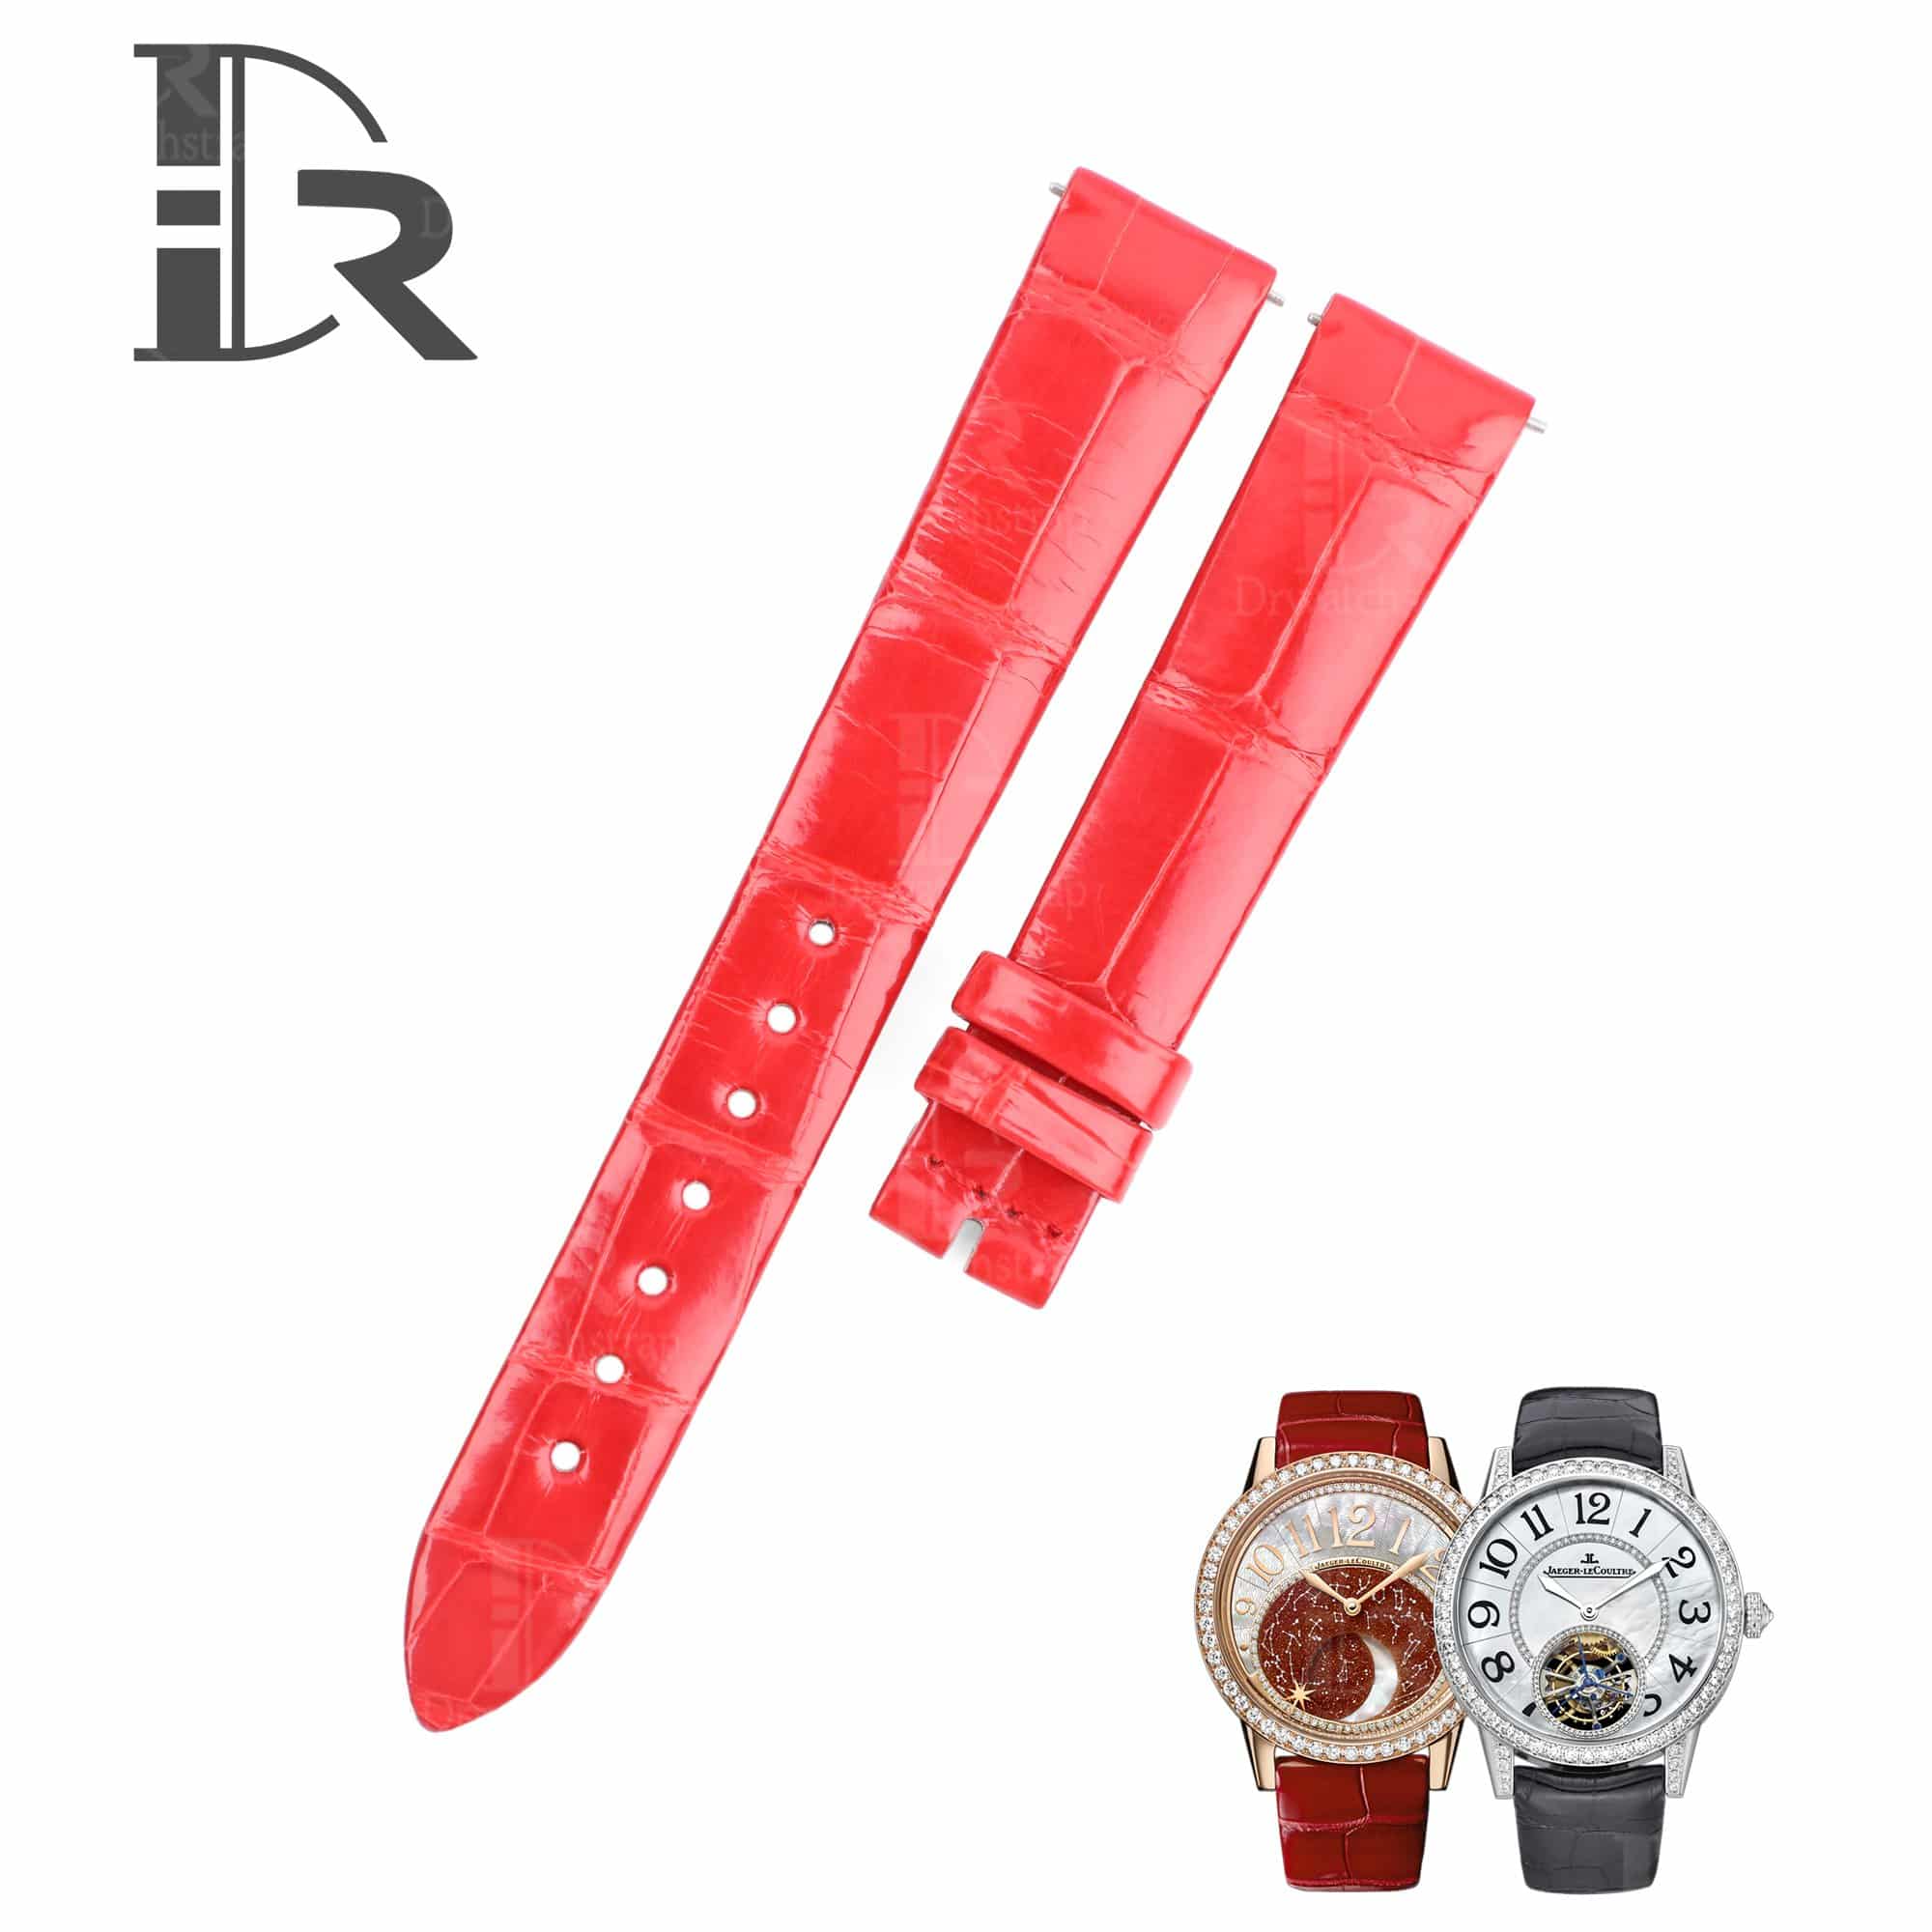 Replacement Jaeger Lecoultre Rendez Vous moon Day and Night watch strap Red Alligator leather watch band 14mm 16mm